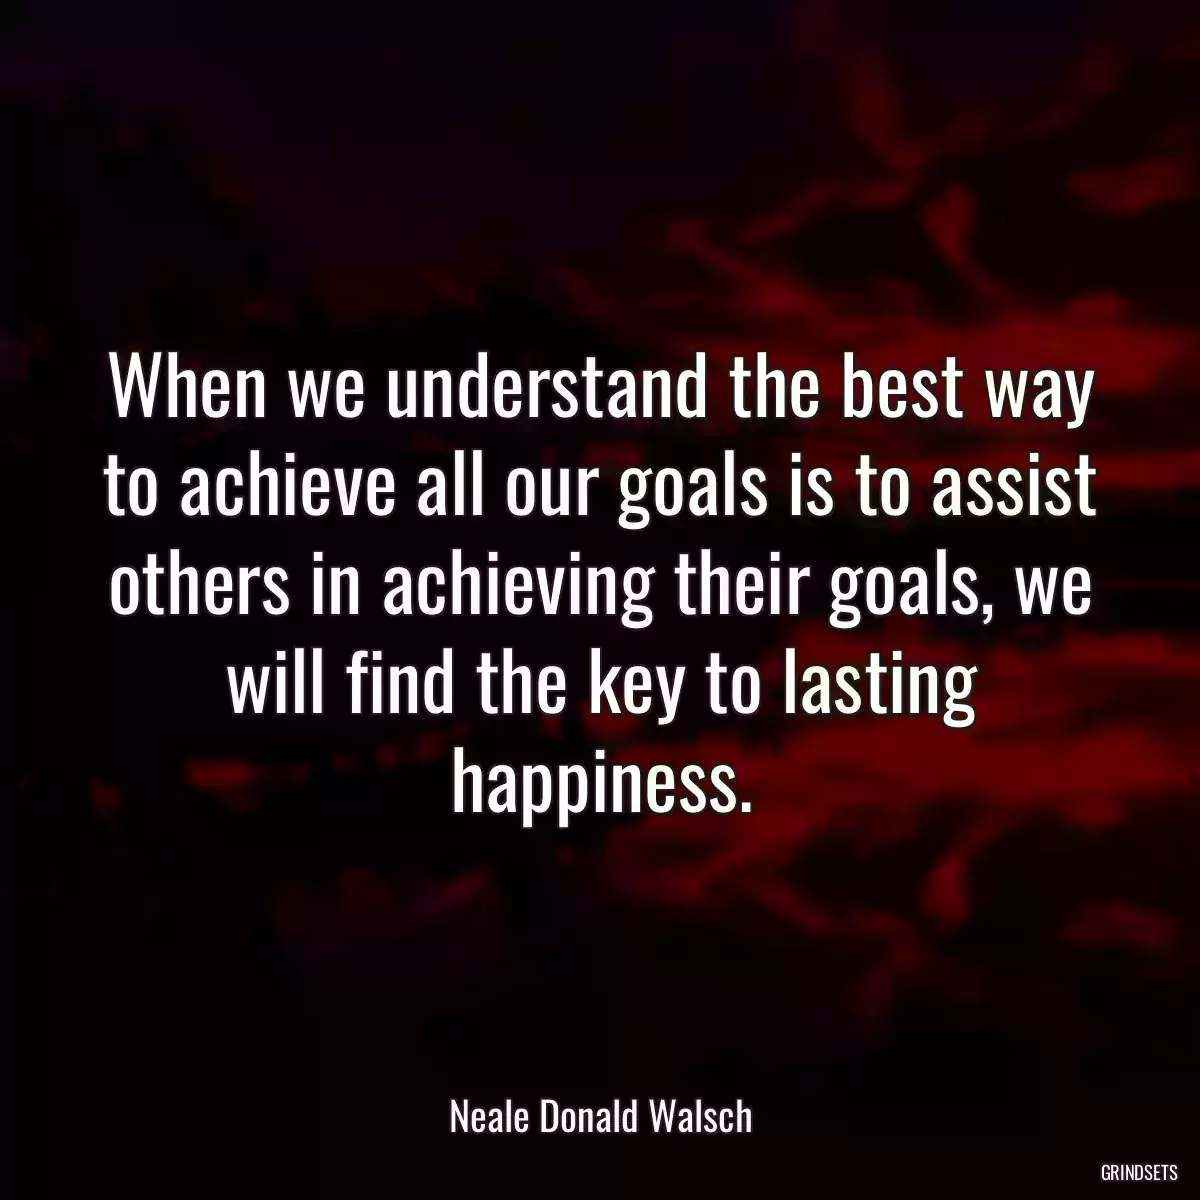 When we understand the best way to achieve all our goals is to assist others in achieving their goals, we will find the key to lasting happiness.